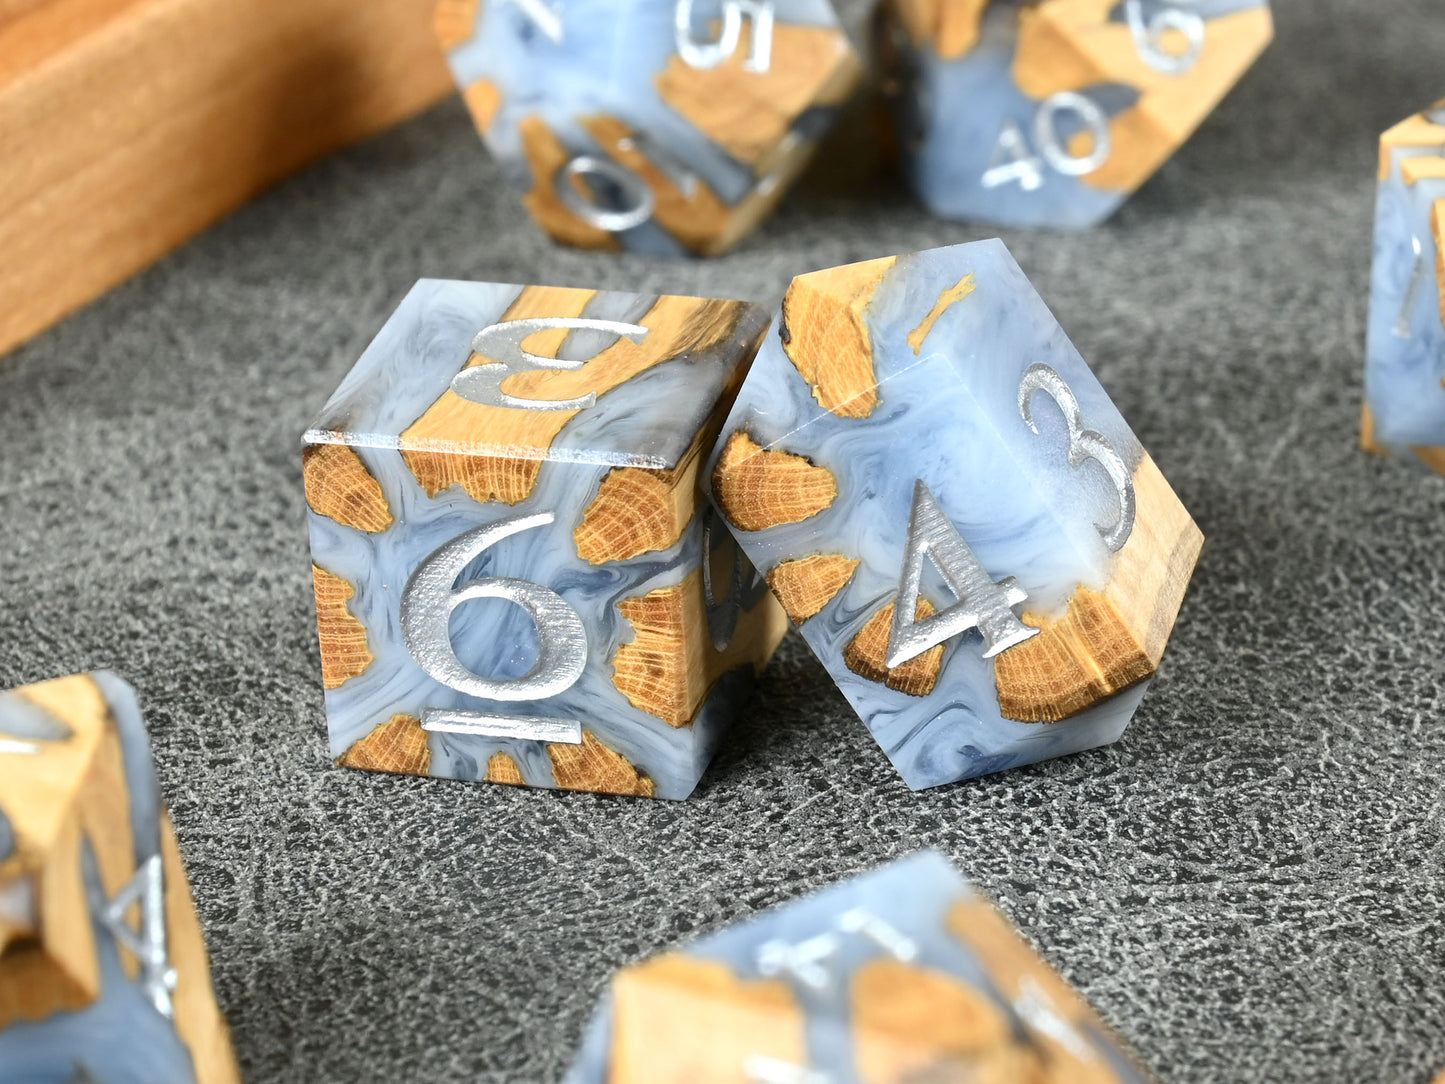 Cholla cactus wood and resin hybrid dice set for dnd ttrpg